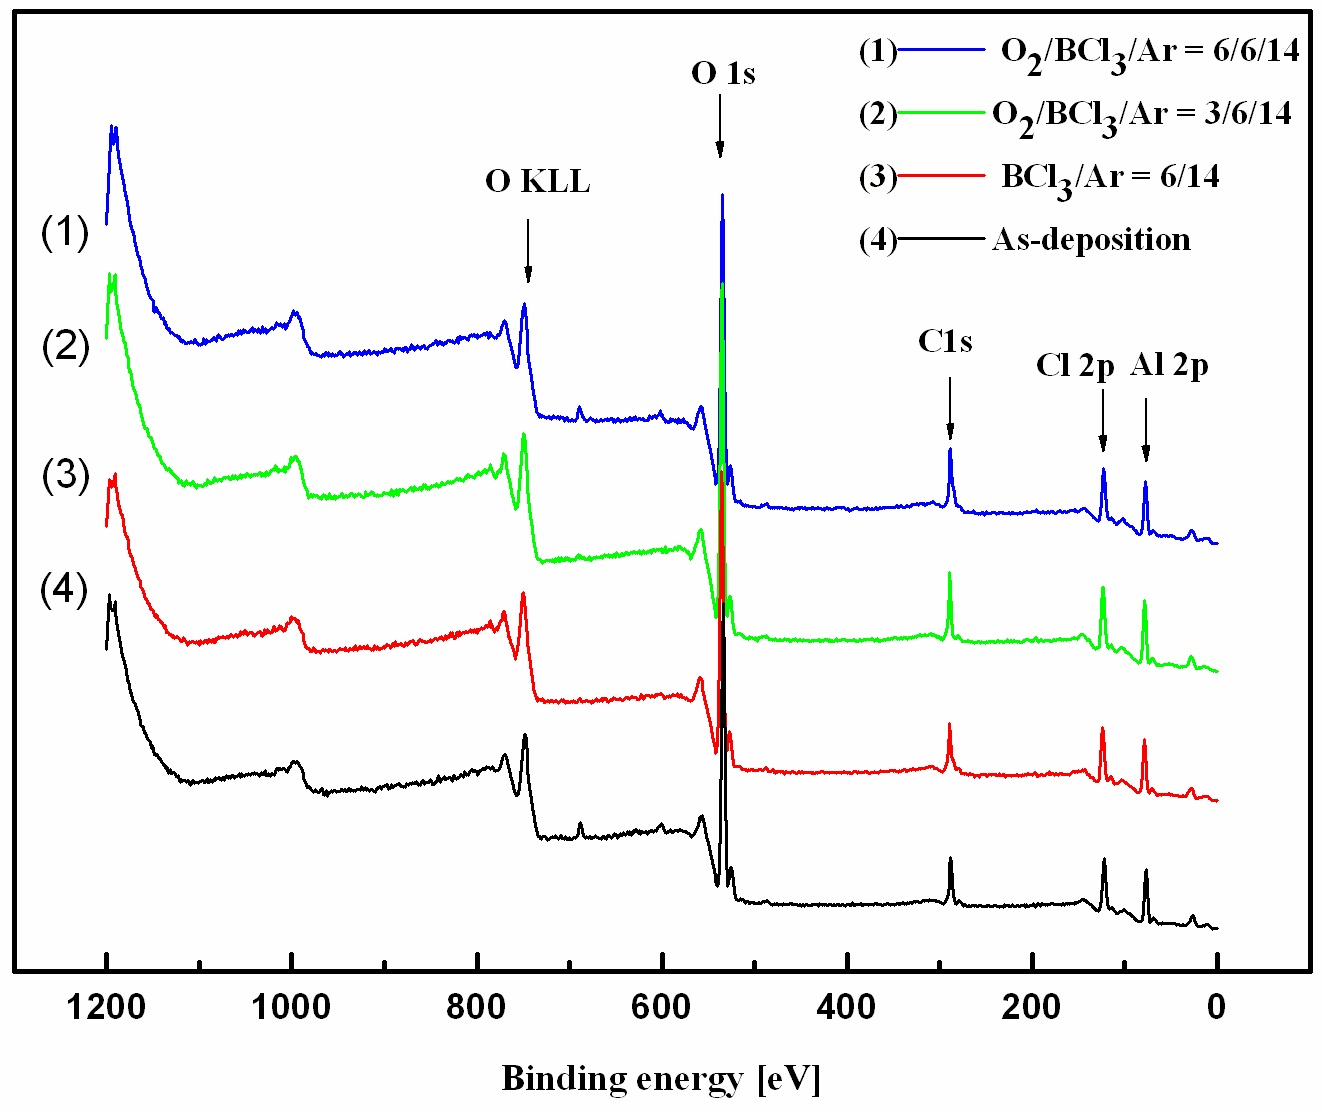 The XPS wide-scan spectra of the Al2O3 surface for the asdepositedfilm and the film etched in the O2/BCl3/Ar plasma.